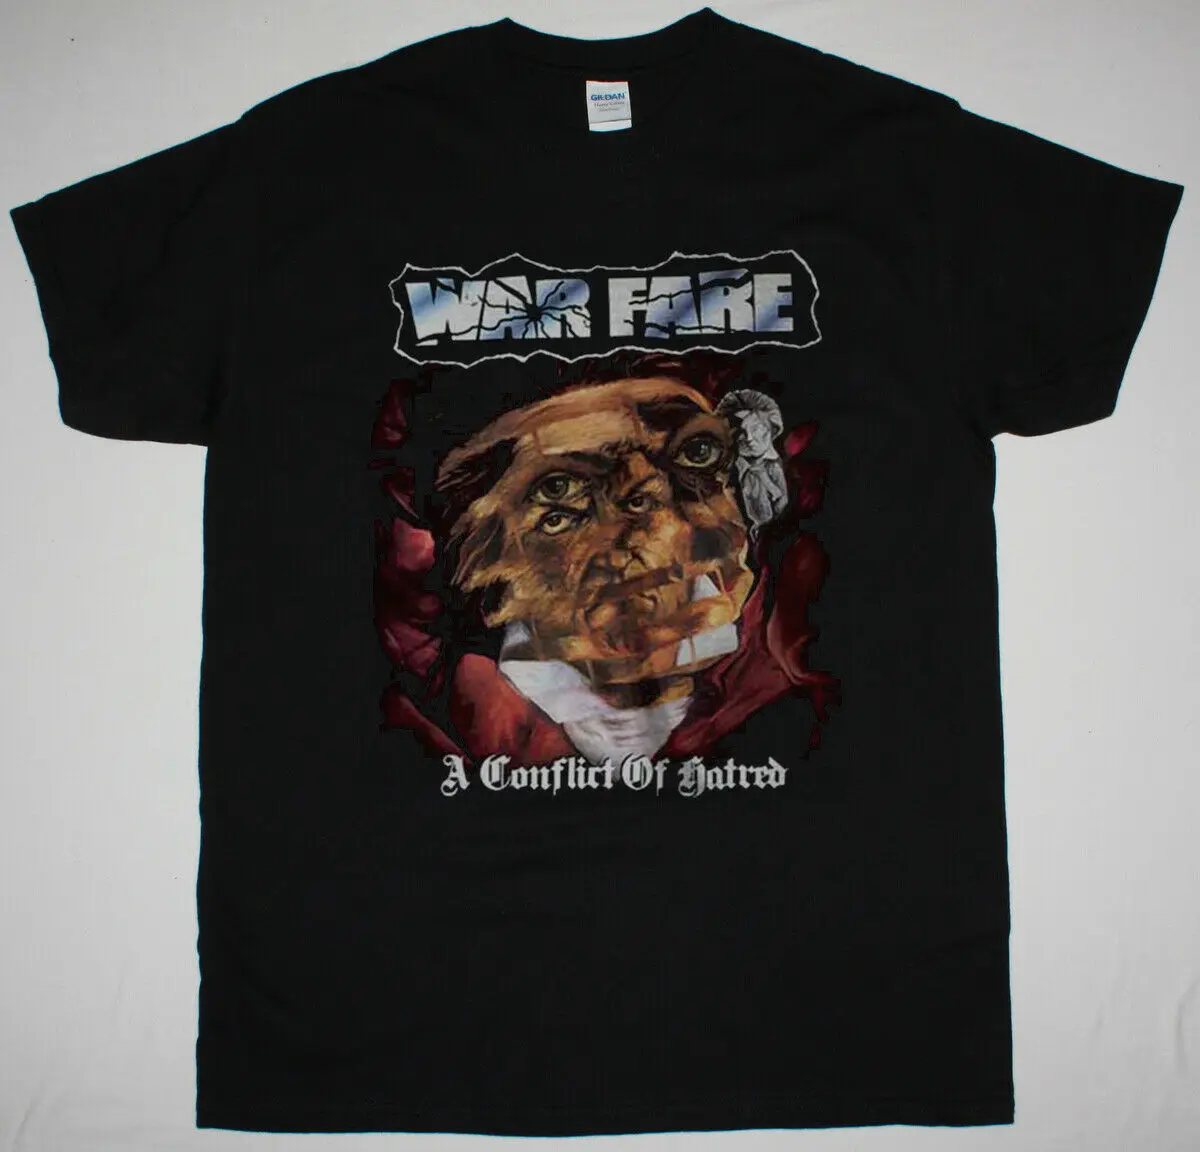 

WARFARE A CONFLICT OF HATRED 1988 BLACK T SHIRT SPEED METAL NWOBHM